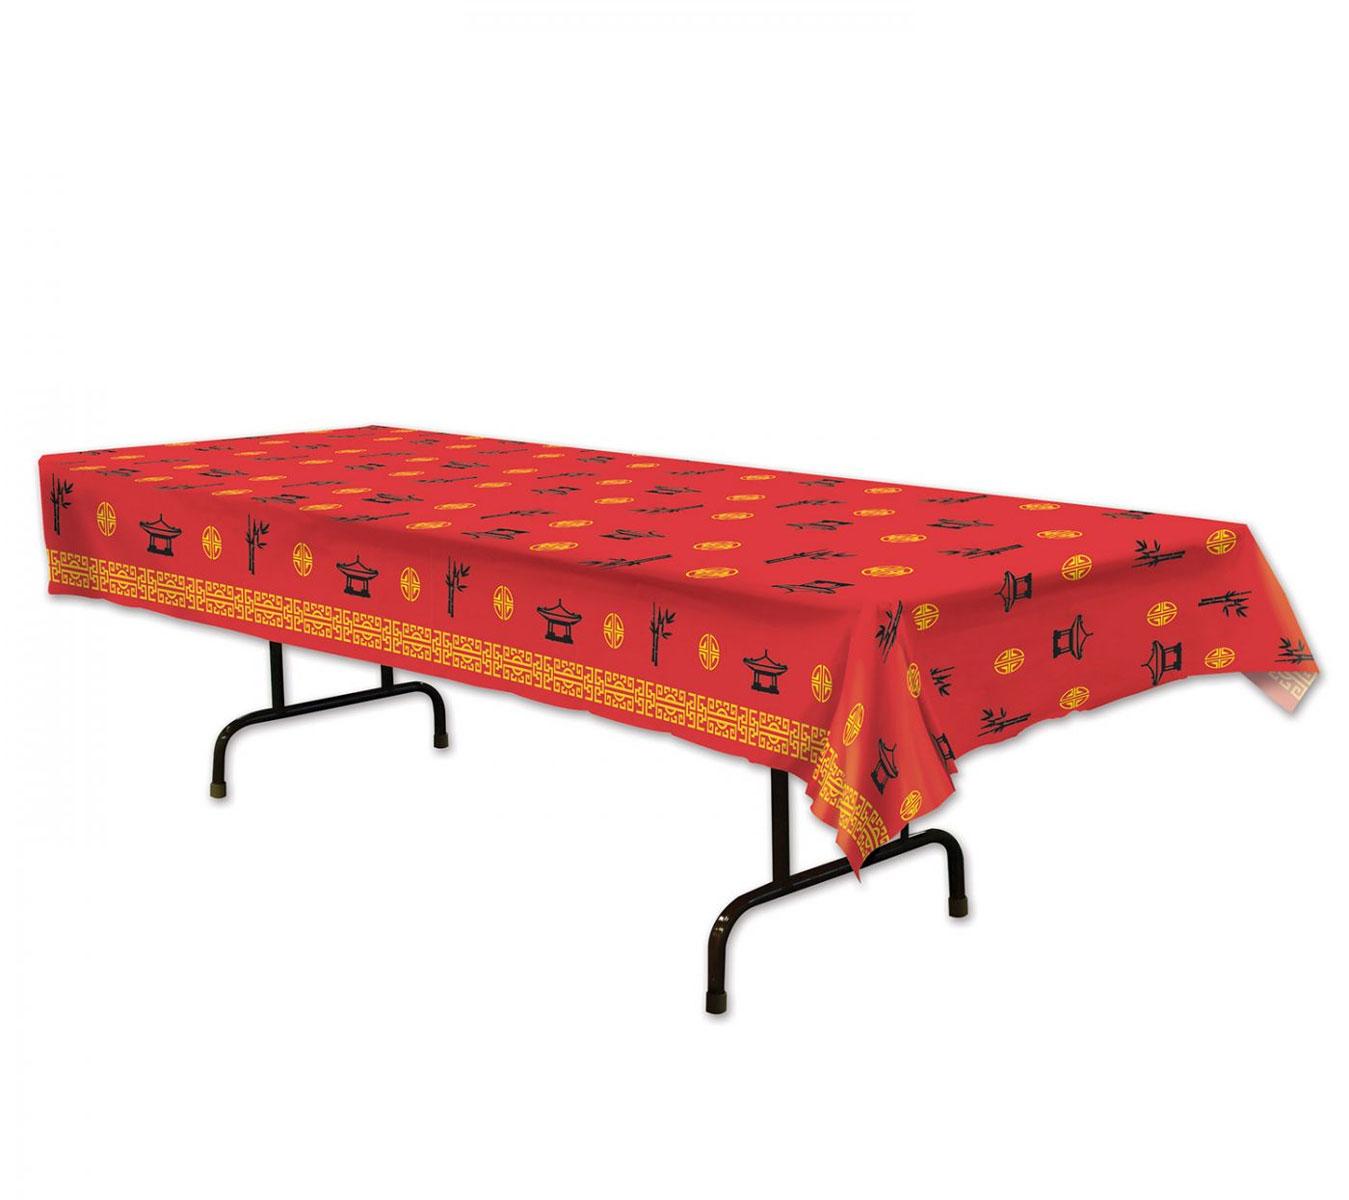 Oriental or Asian Themed Plastic Table Cover by Beistle 59966 available here at Karnival Costumes online party shop